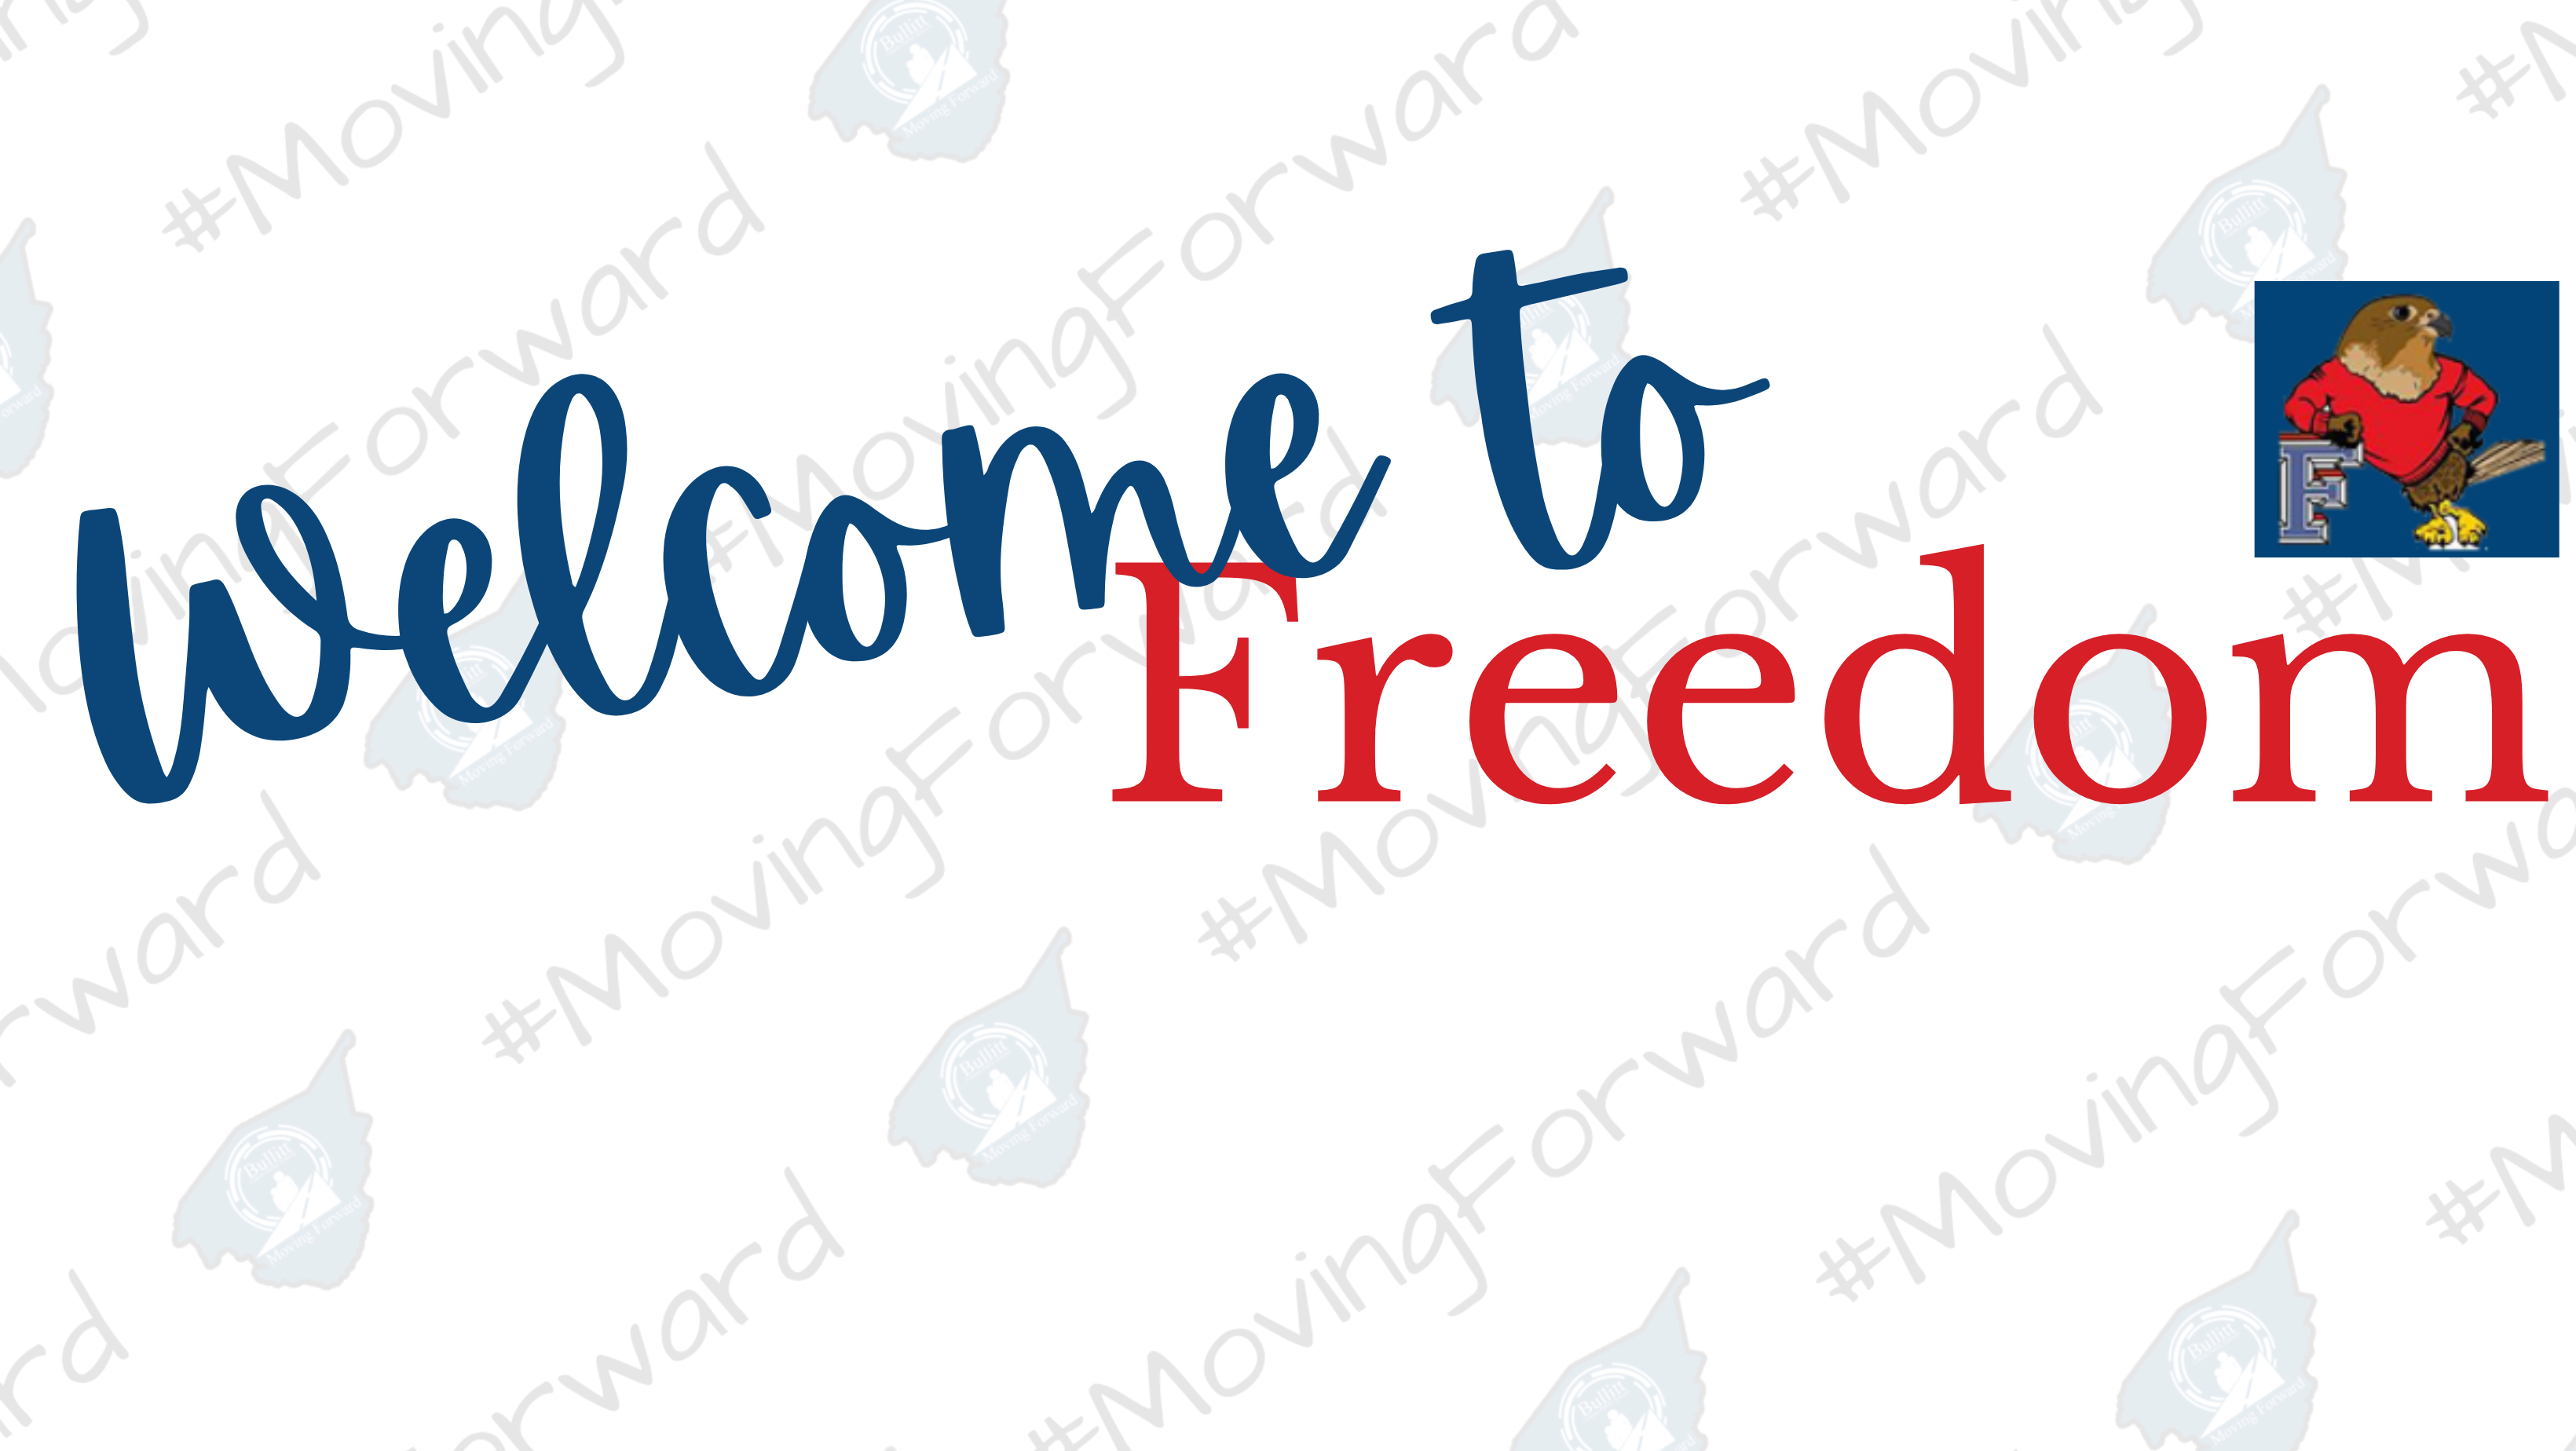 Welcome to Freedom